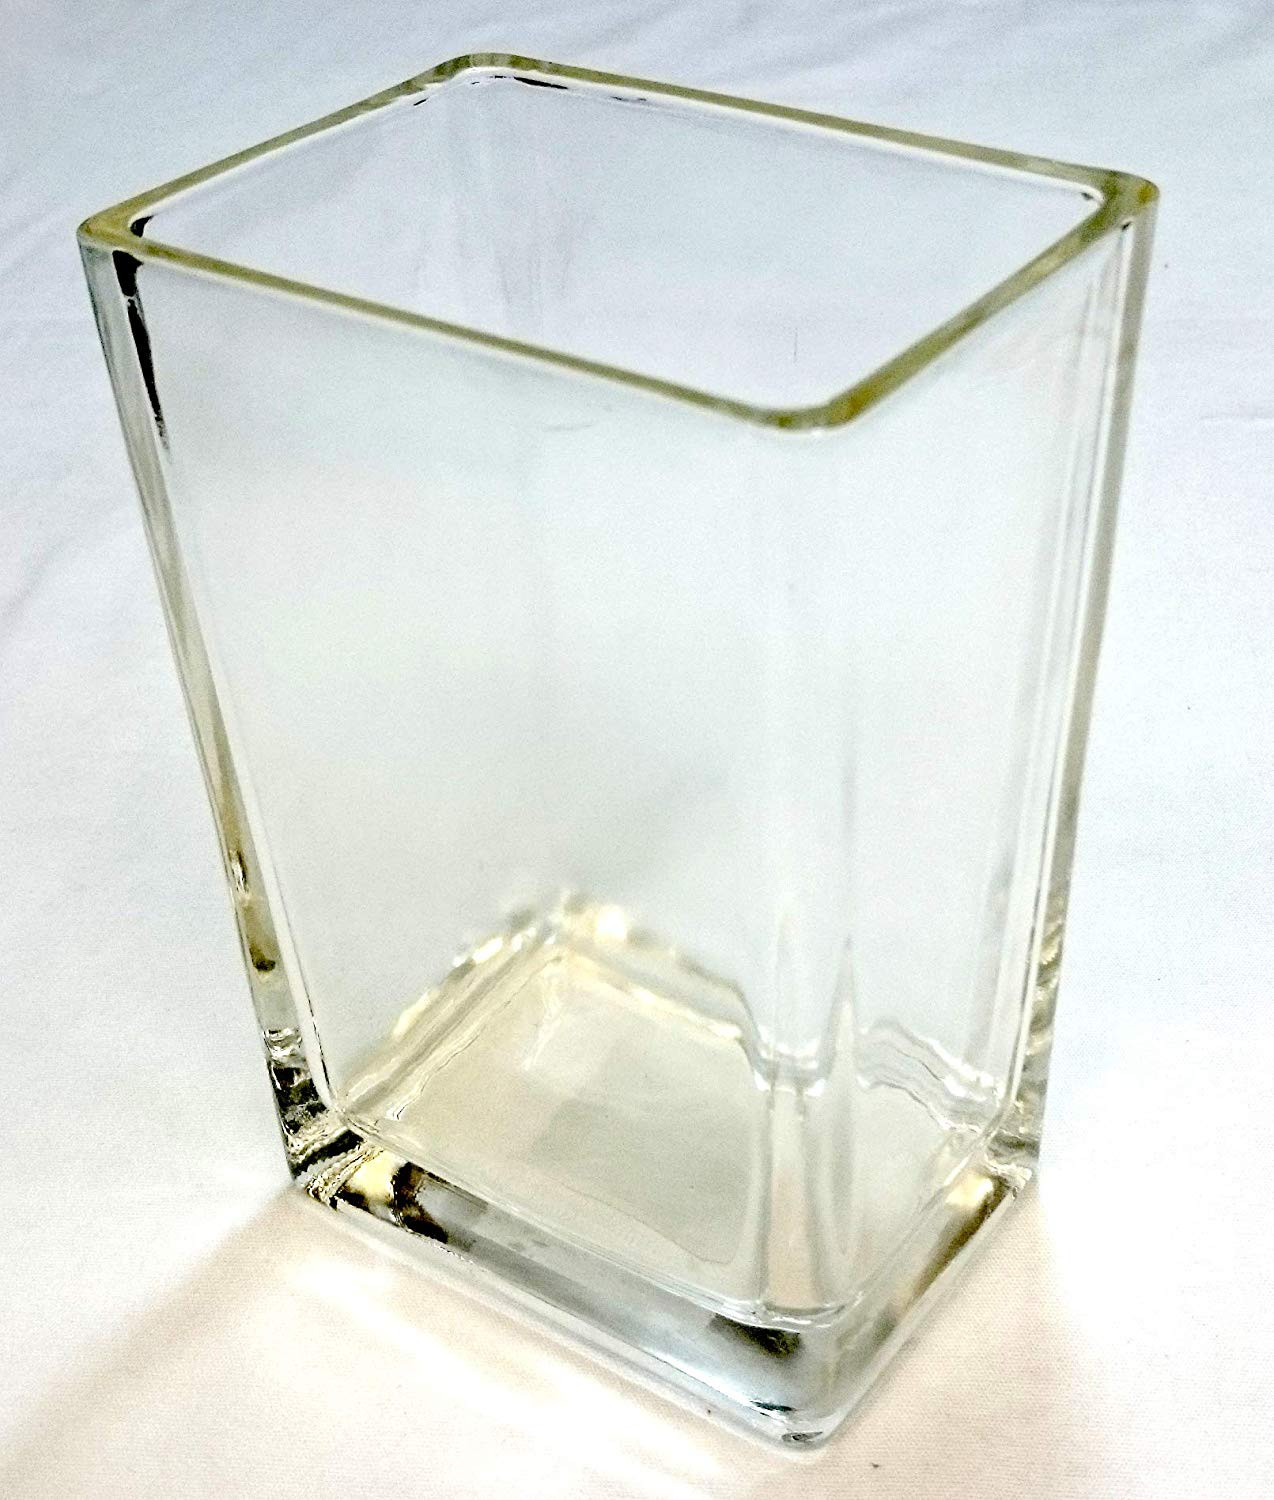 8 inch round glass vase of amazon com concord global trading 6 rectangle 3x4 base glass vase intended for amazon com concord global trading 6 rectangle 3x4 base glass vase six inch high tapered clear pillar centerpiece 6x4x3 candleholder home kitchen